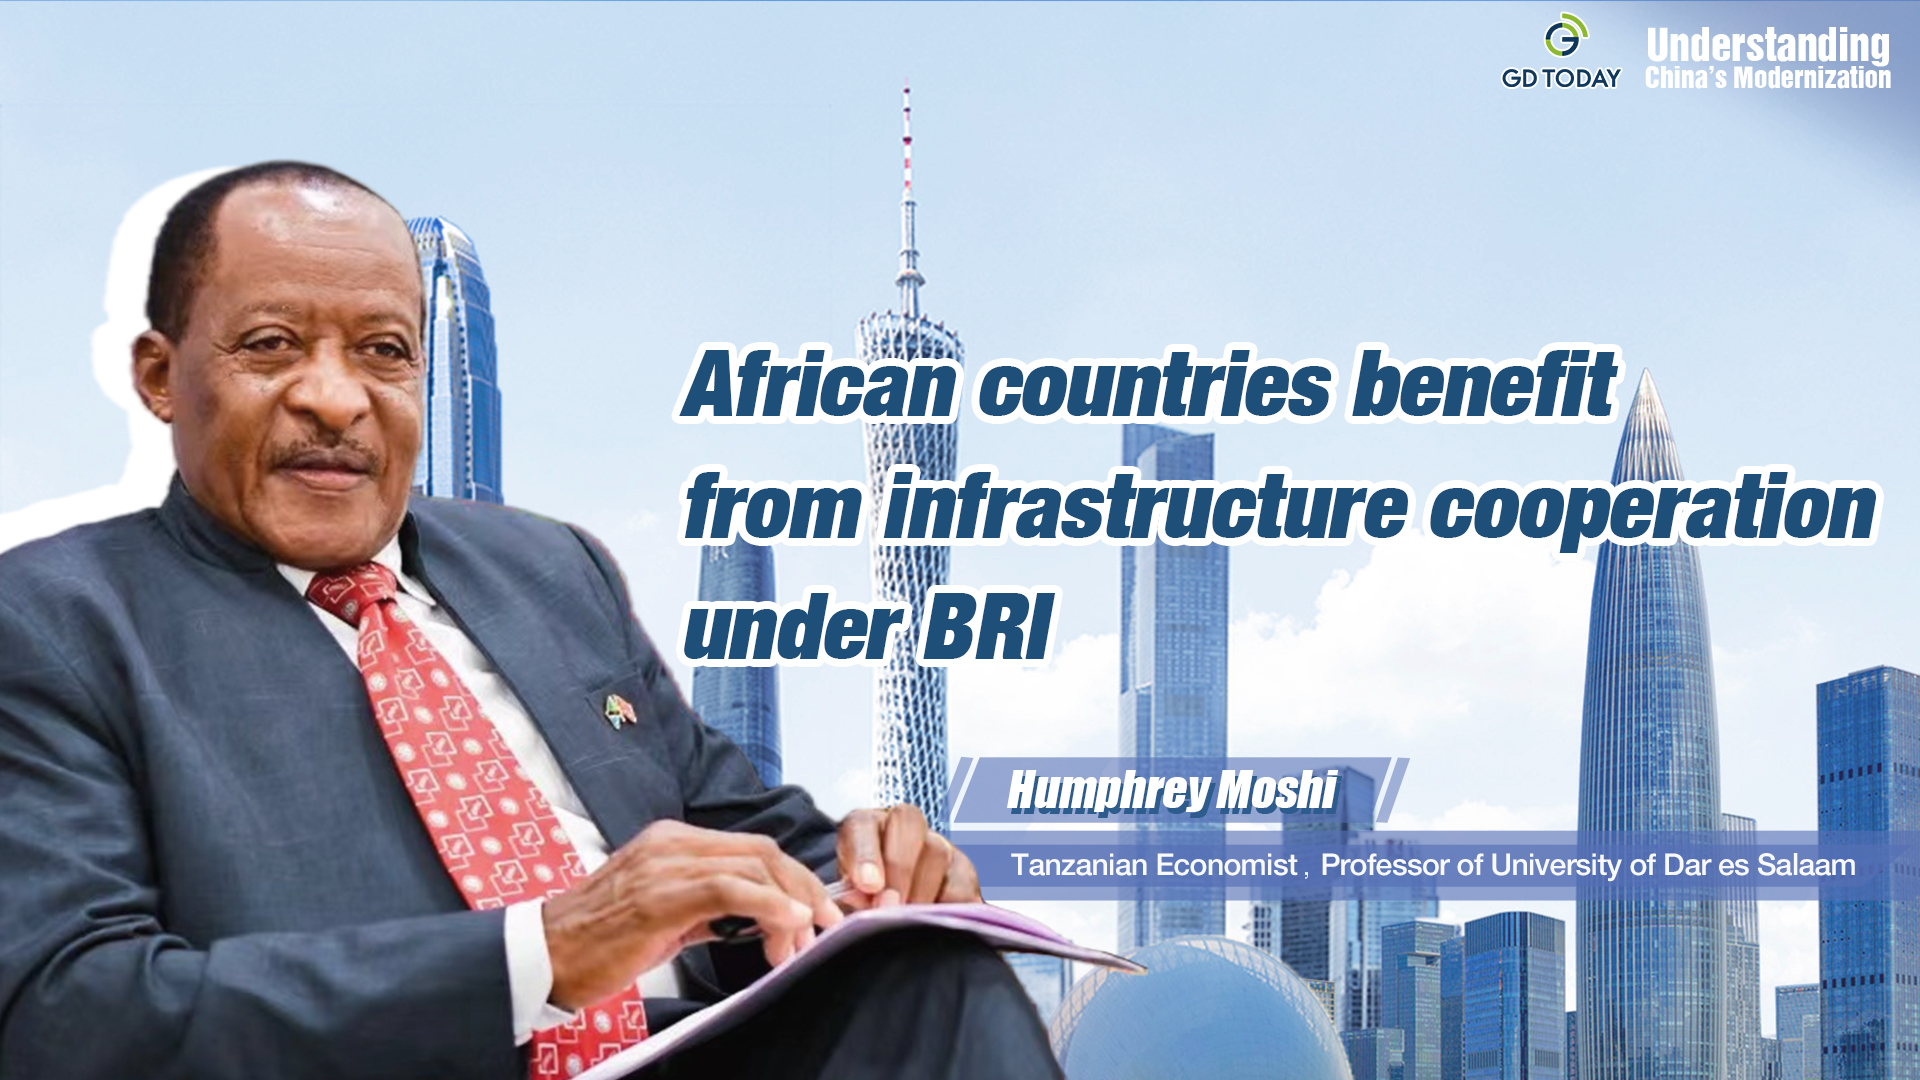 Tanzanian economist: African countries benefit from infrastructure cooperation under BRI